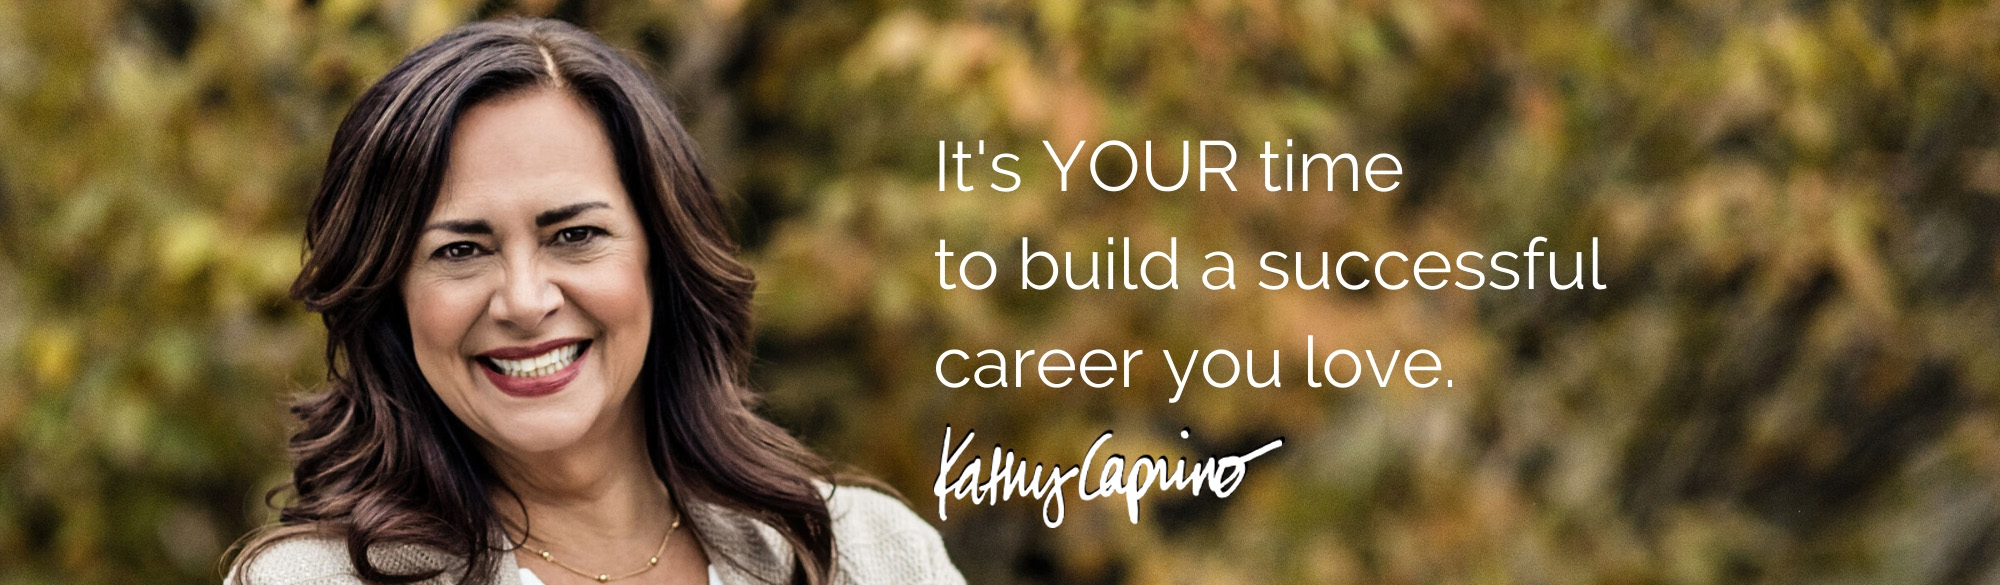 It's Time For You To Shine and Make The Impact You Long To - Kathy Caprino